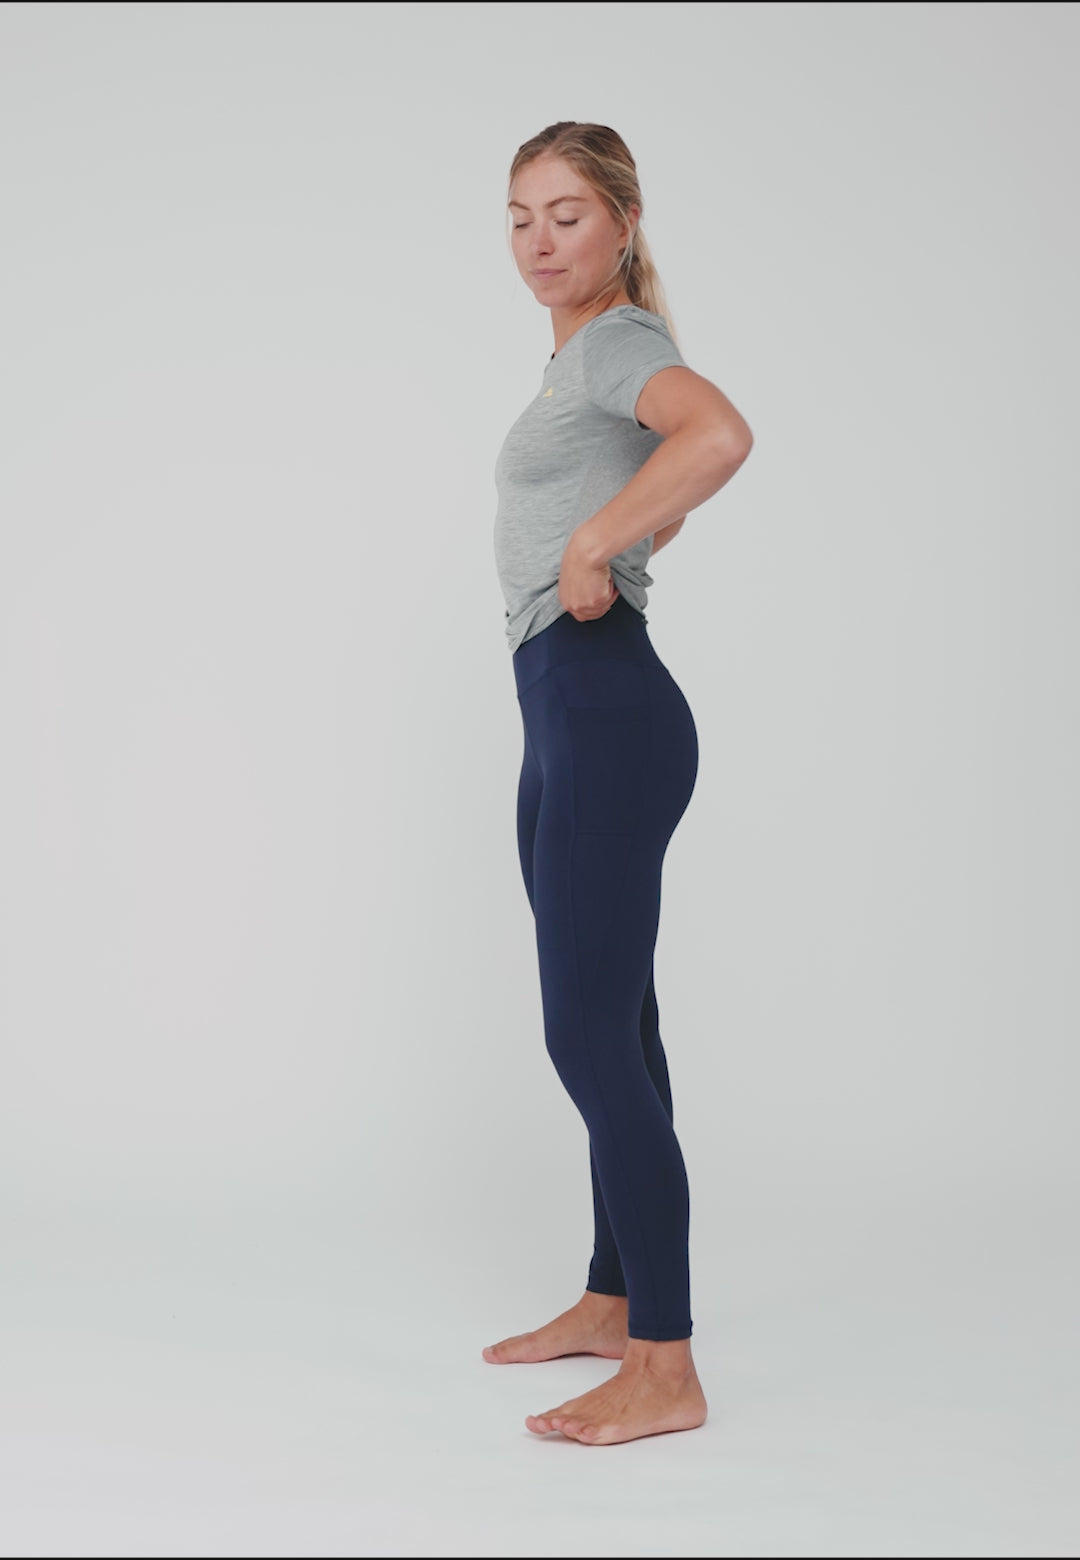 Girls Yoga Pants in leviathan's Roots Design -  Denmark